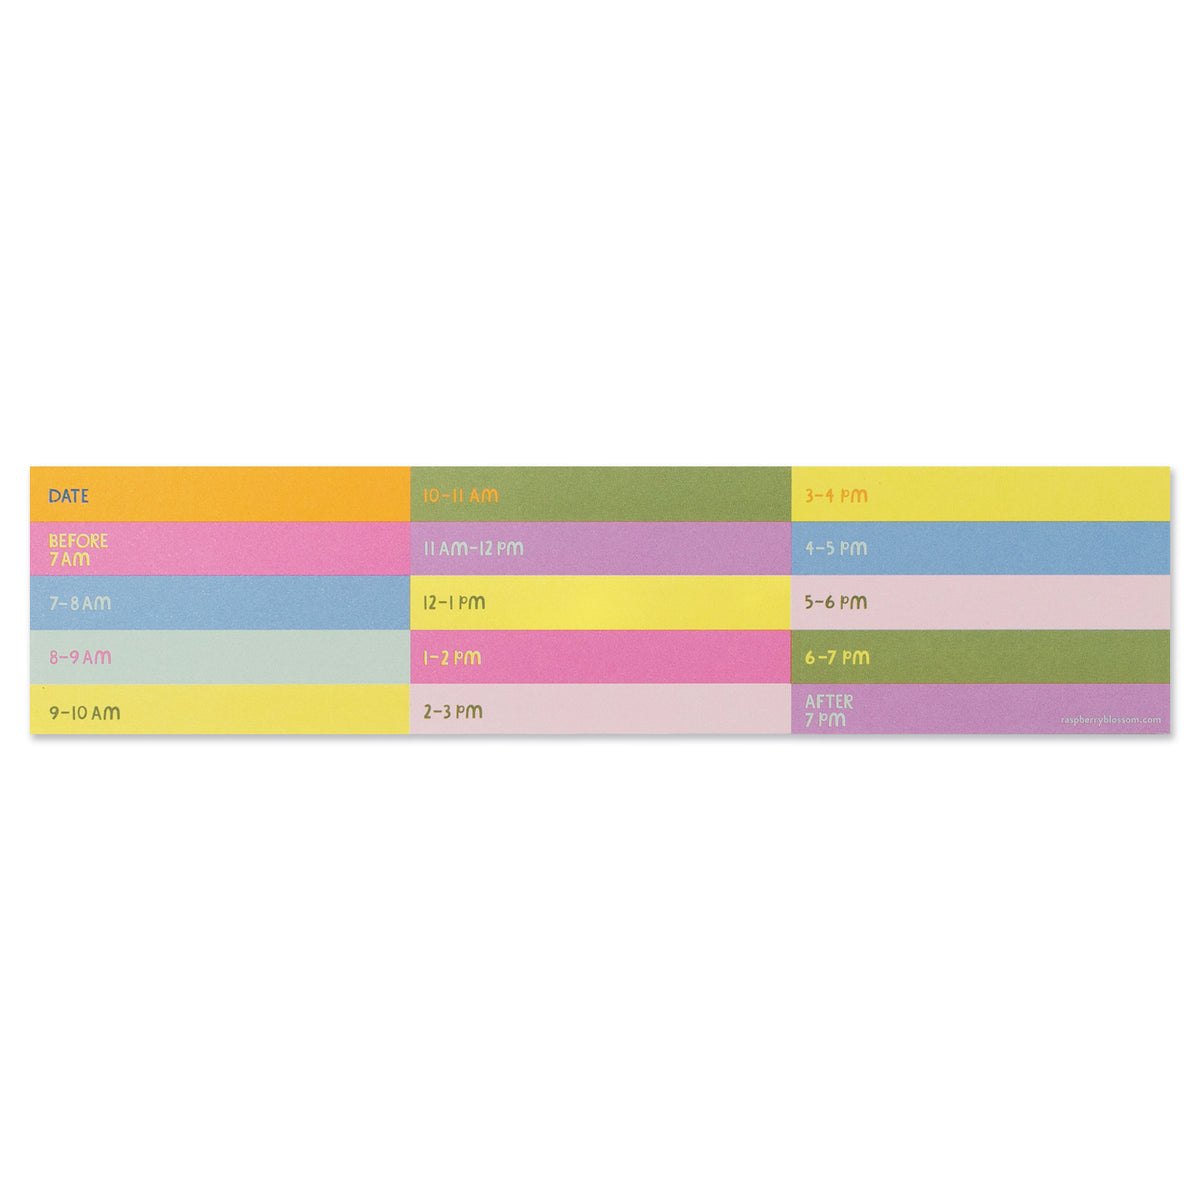 A multicoloured slim oblong notepad that breaks down the hours of the day so you can note appointments, meetings or tasks. Each time slot is coloured a different block colour. Times range from before 7am, then hour by hour until after 7pm.